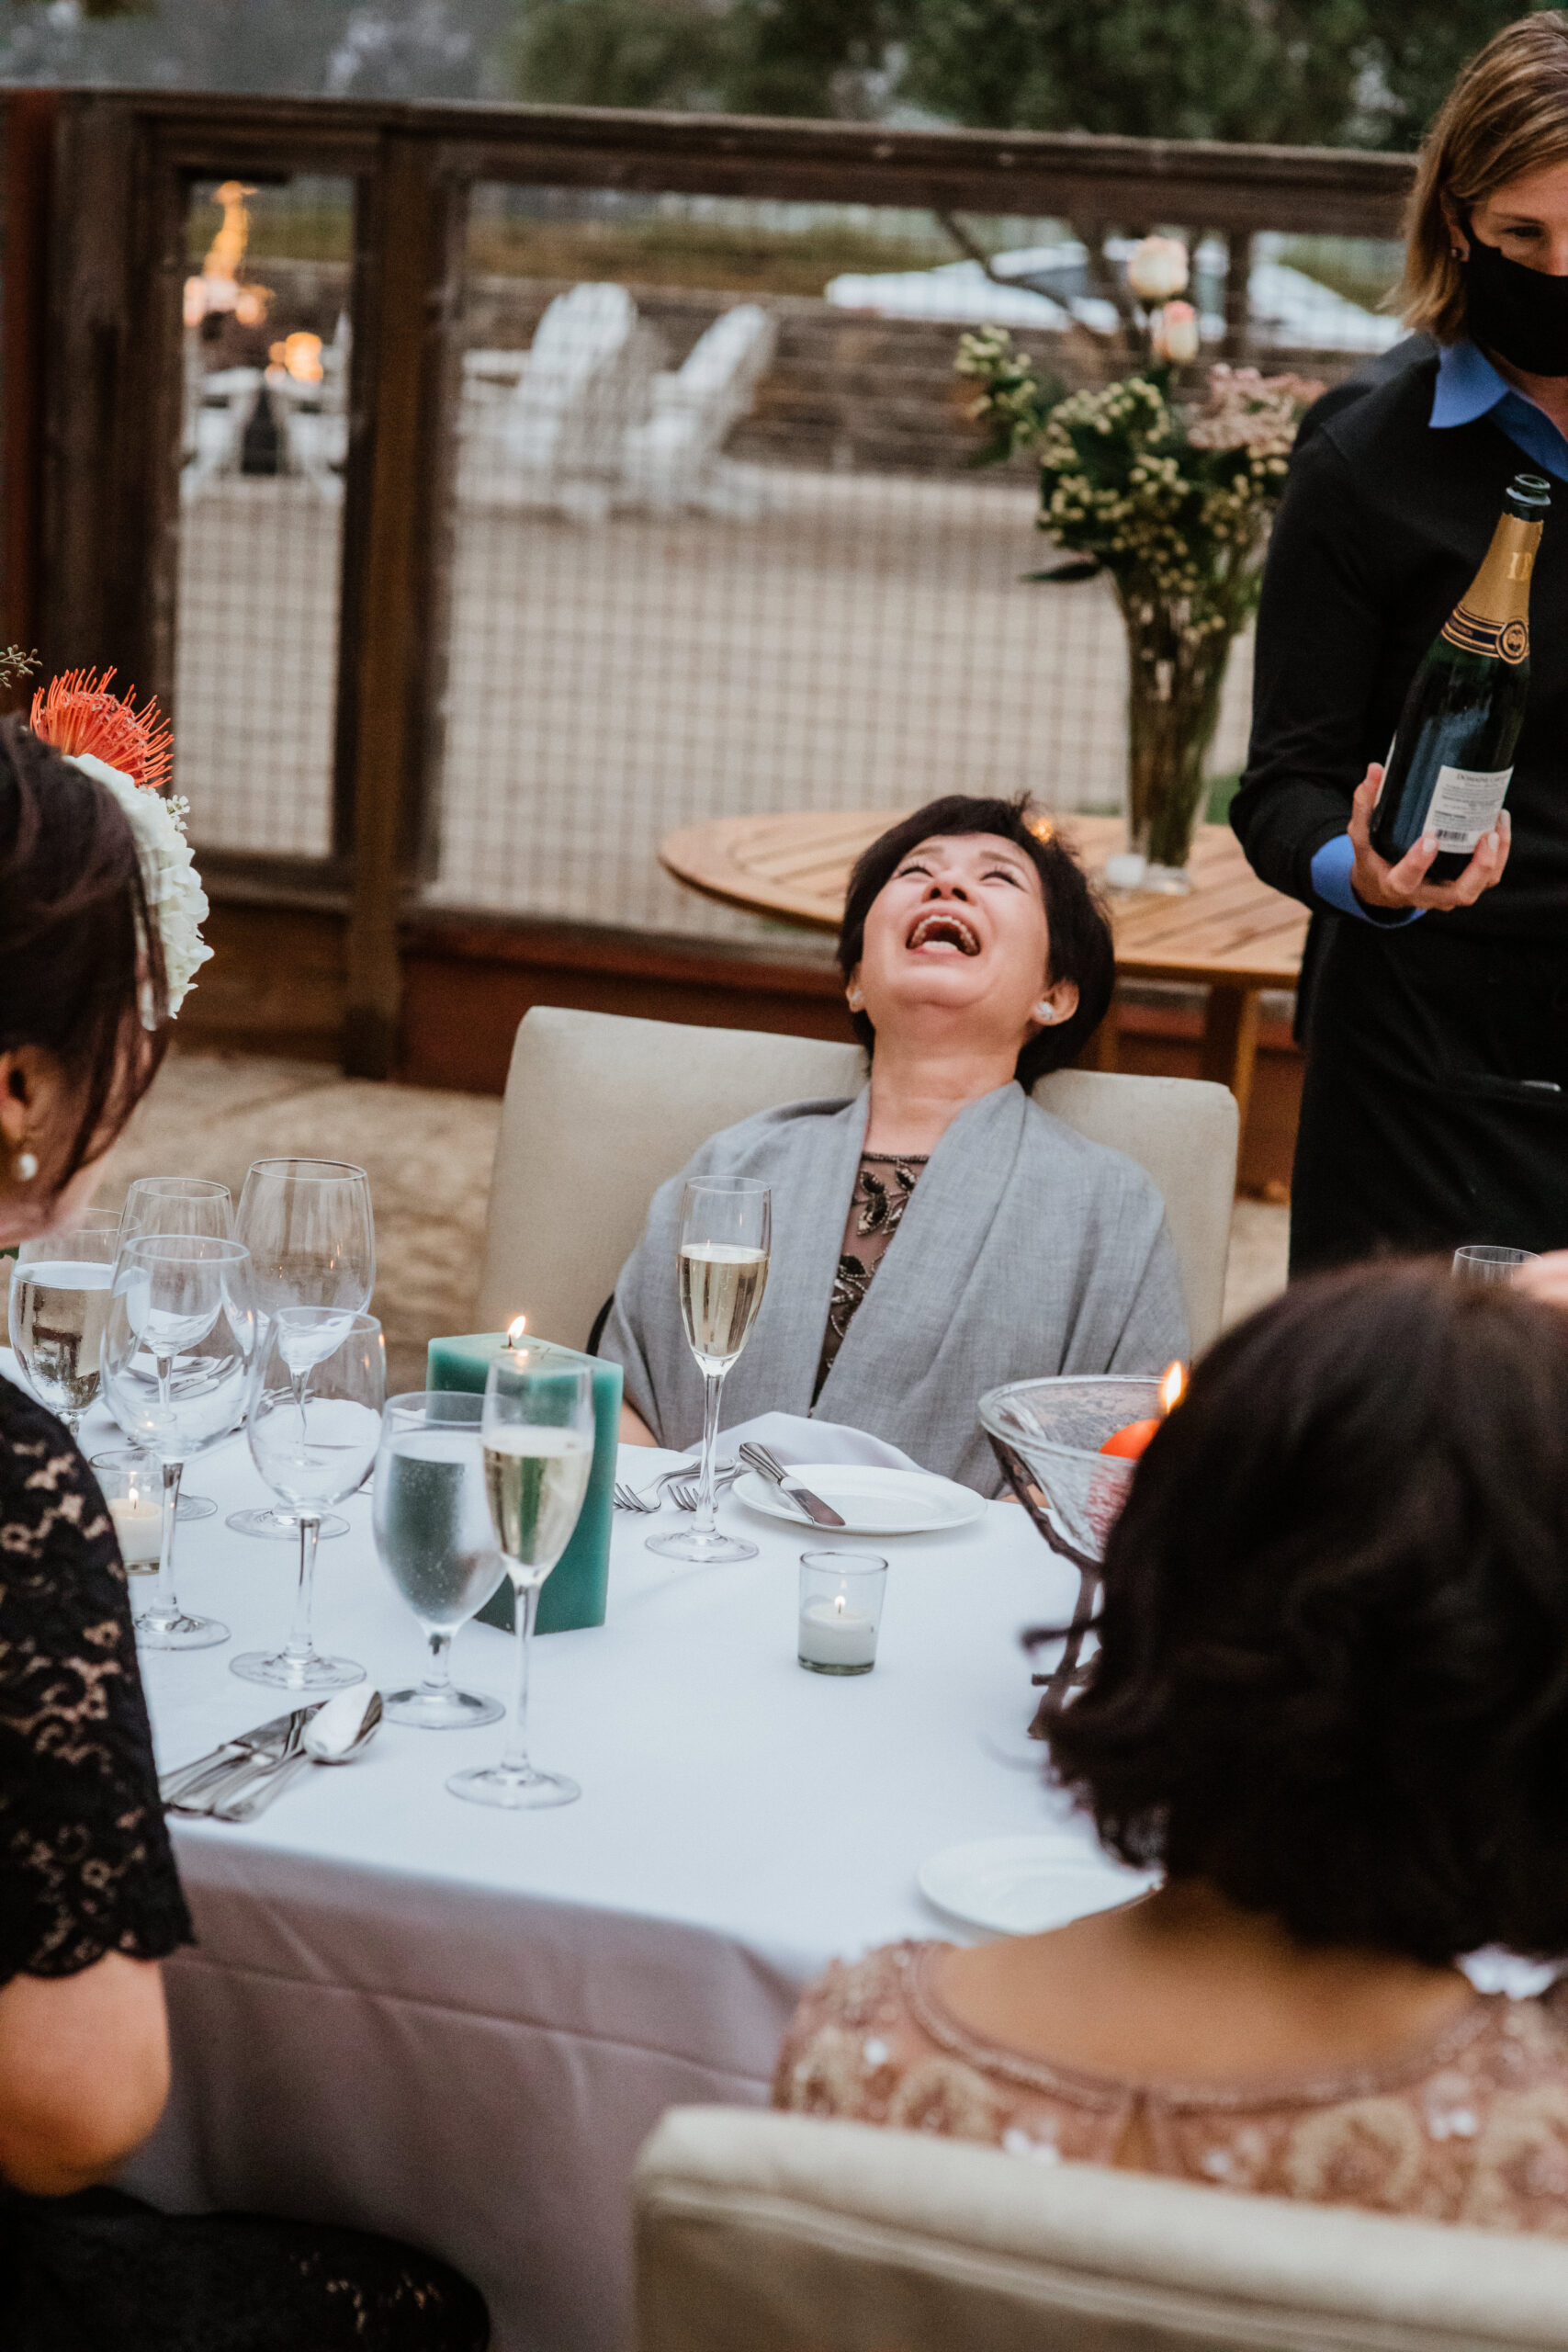 Family members laugh and celebrate during the reception at Napa valley vineyard wedding